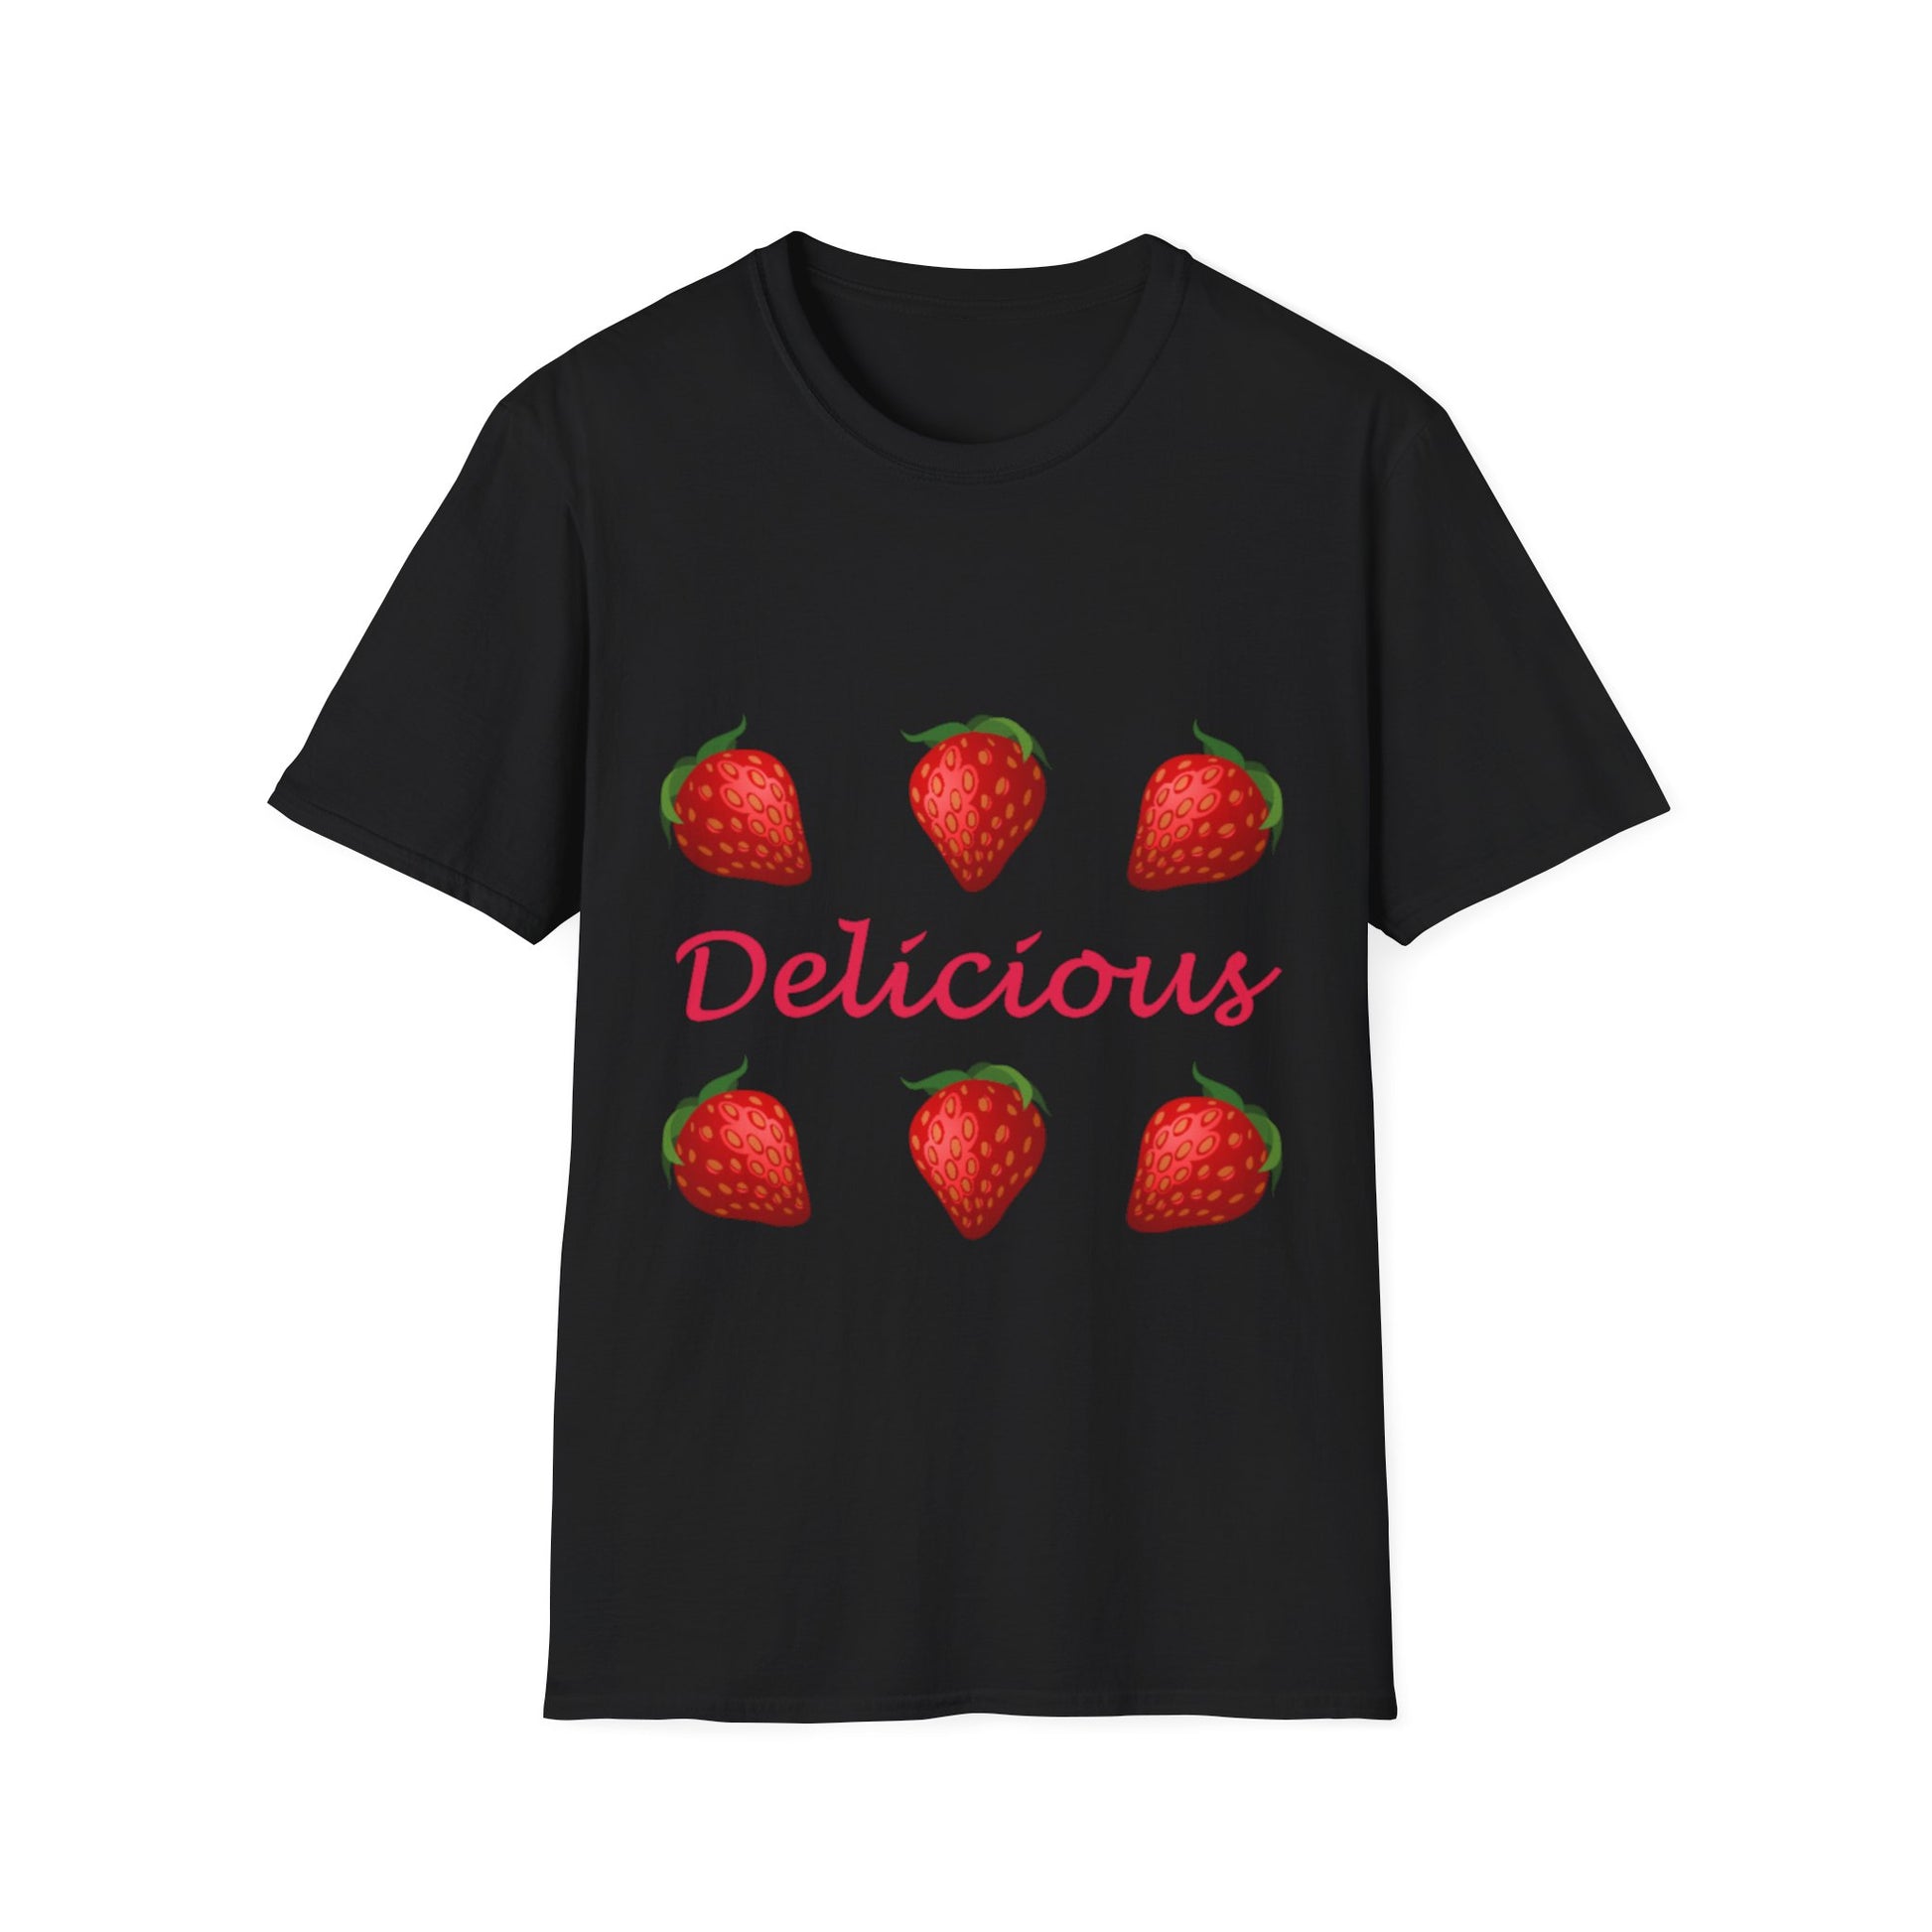 A black t-shirt with a design of strawberries and the word delicious in the middle.